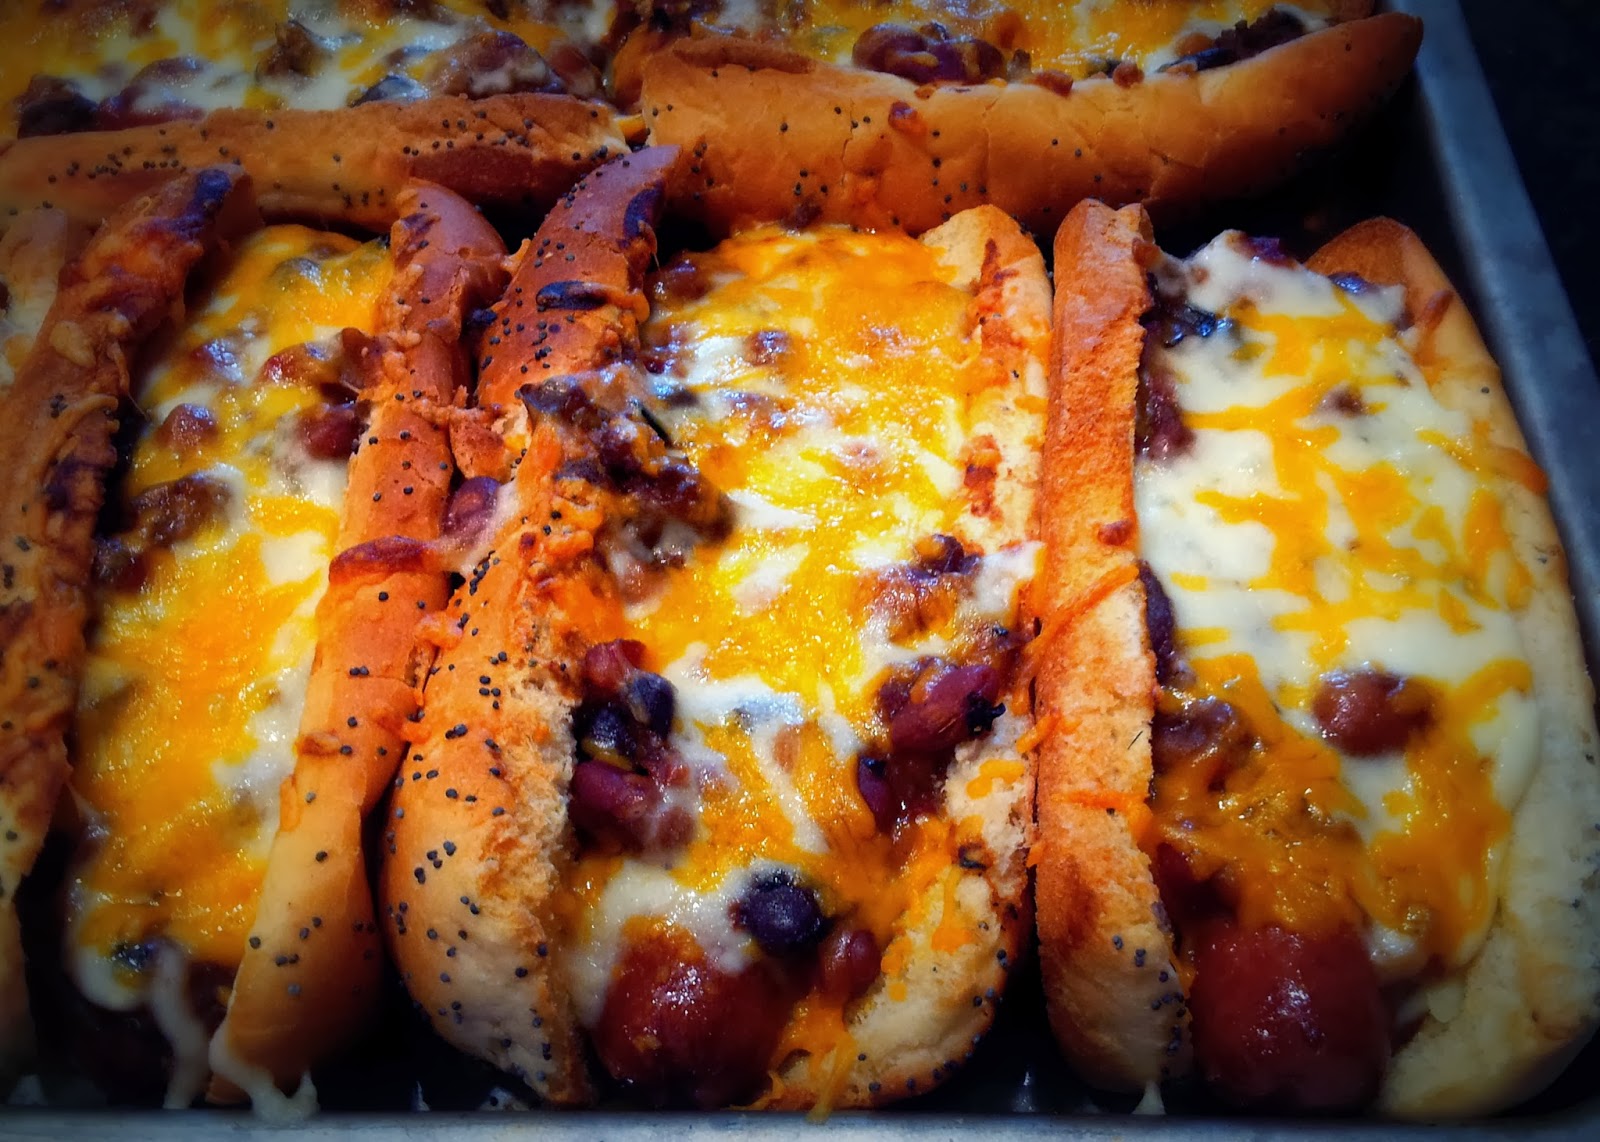 Baked Chili-Cheese Dogs